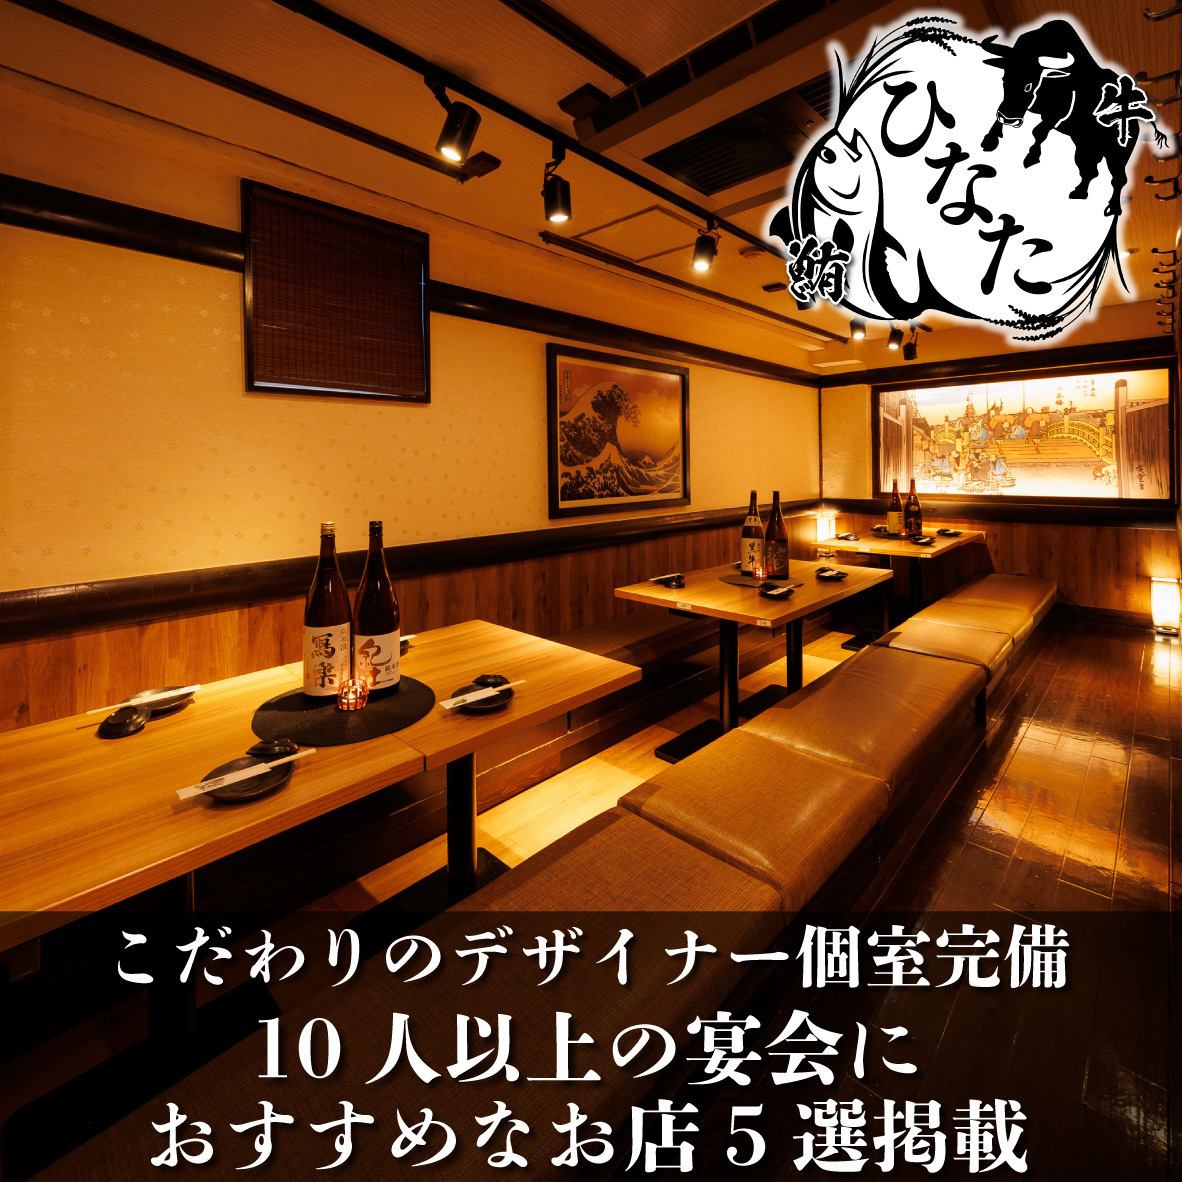 We have a private room for only 2 people♪